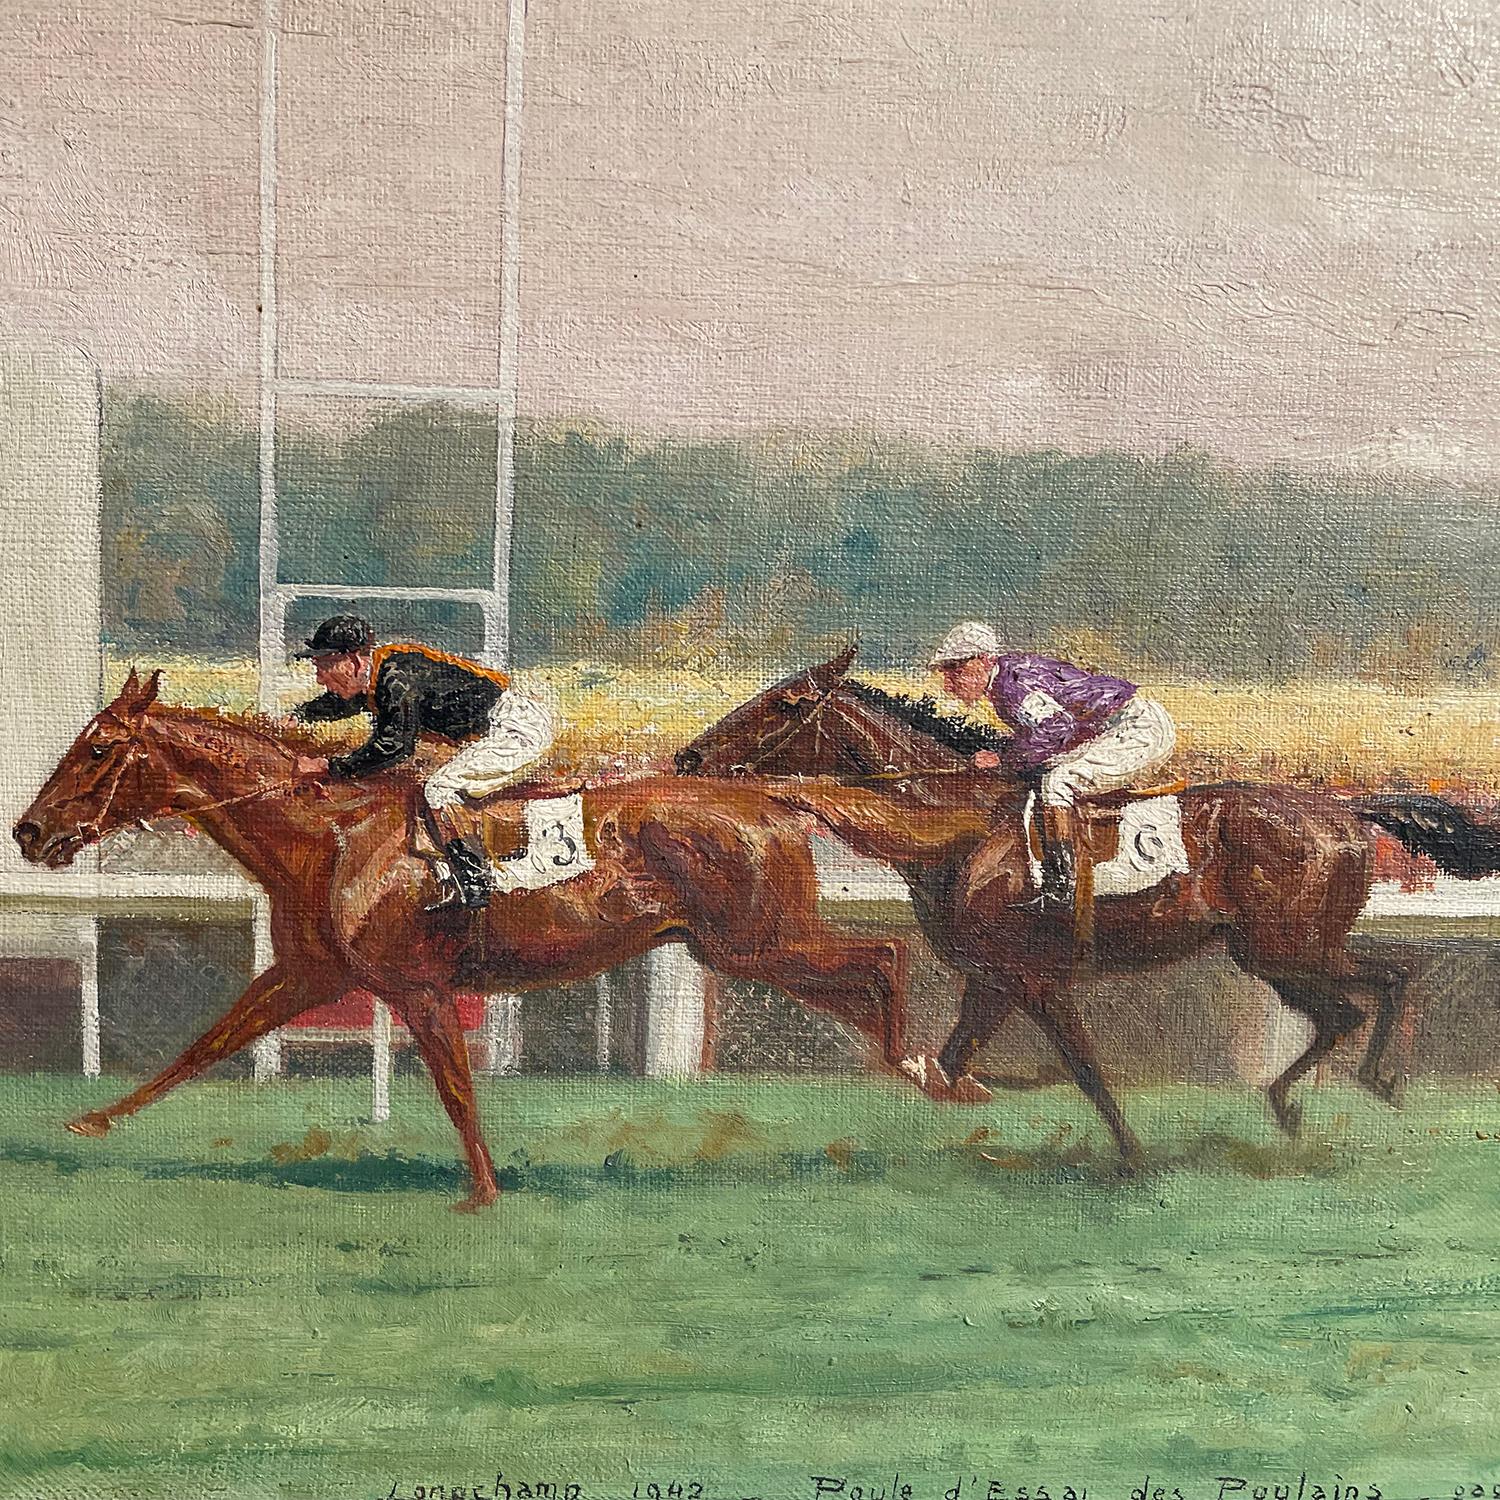 Hand-Carved 20th Century French Oil Painting of a Longchamp Horse Racing by Eugène Pechaubes For Sale